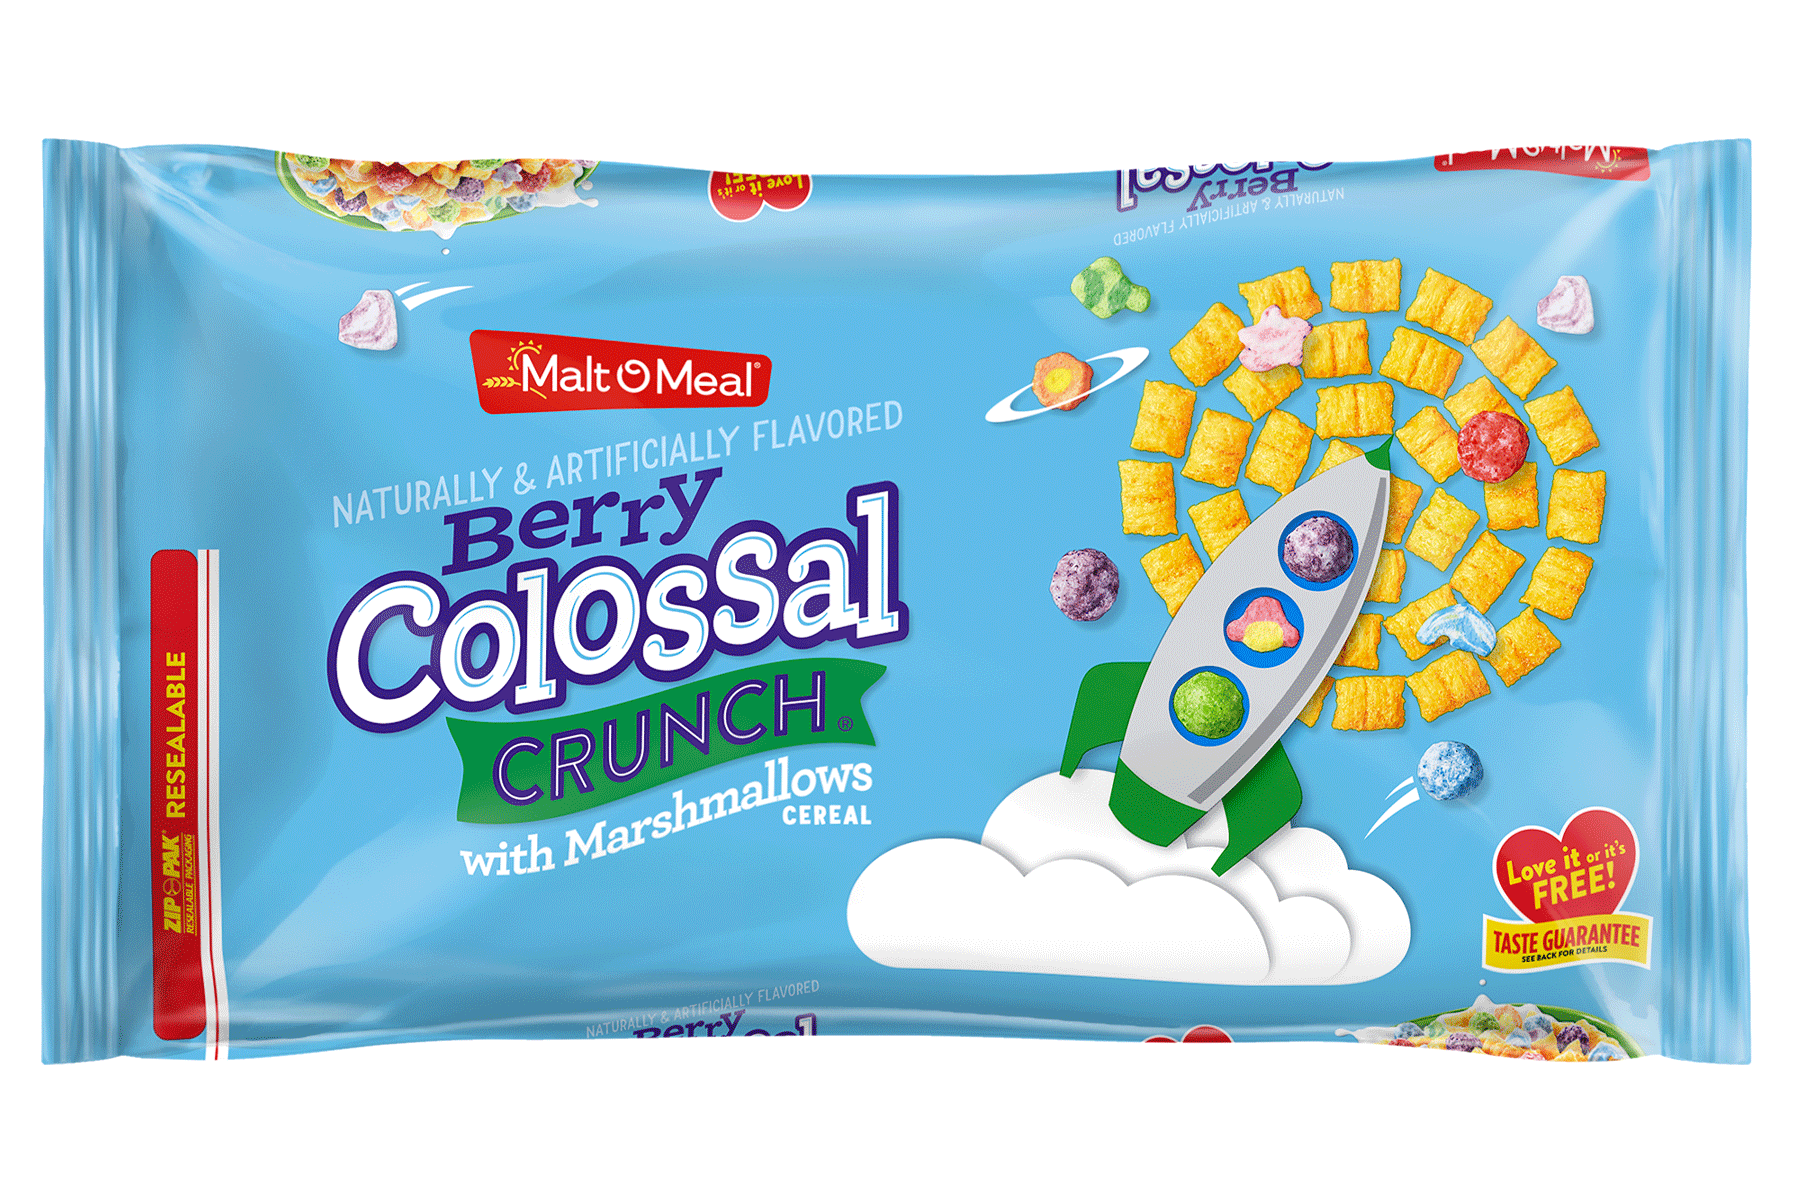 New Malt-O-Meal Berry Colossal Crunch Cereal Bag